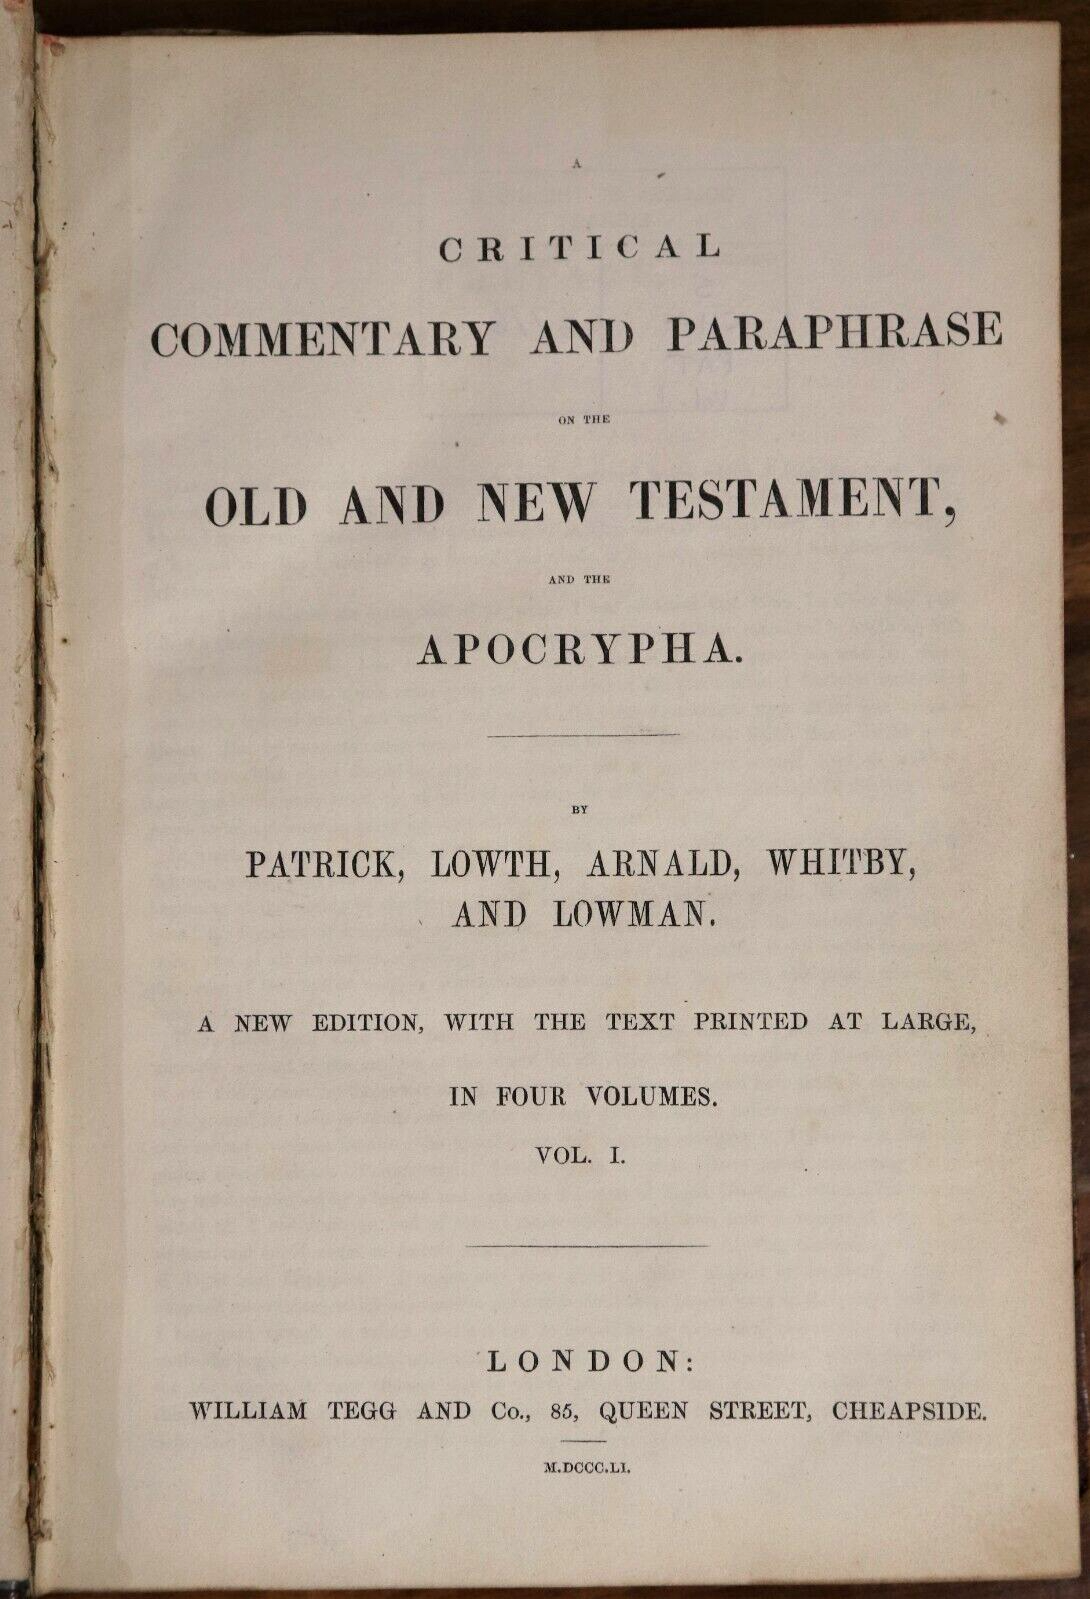 1851 3vol Commentary On Old & New Testament & Apocrypha Antiquarian Books - 0